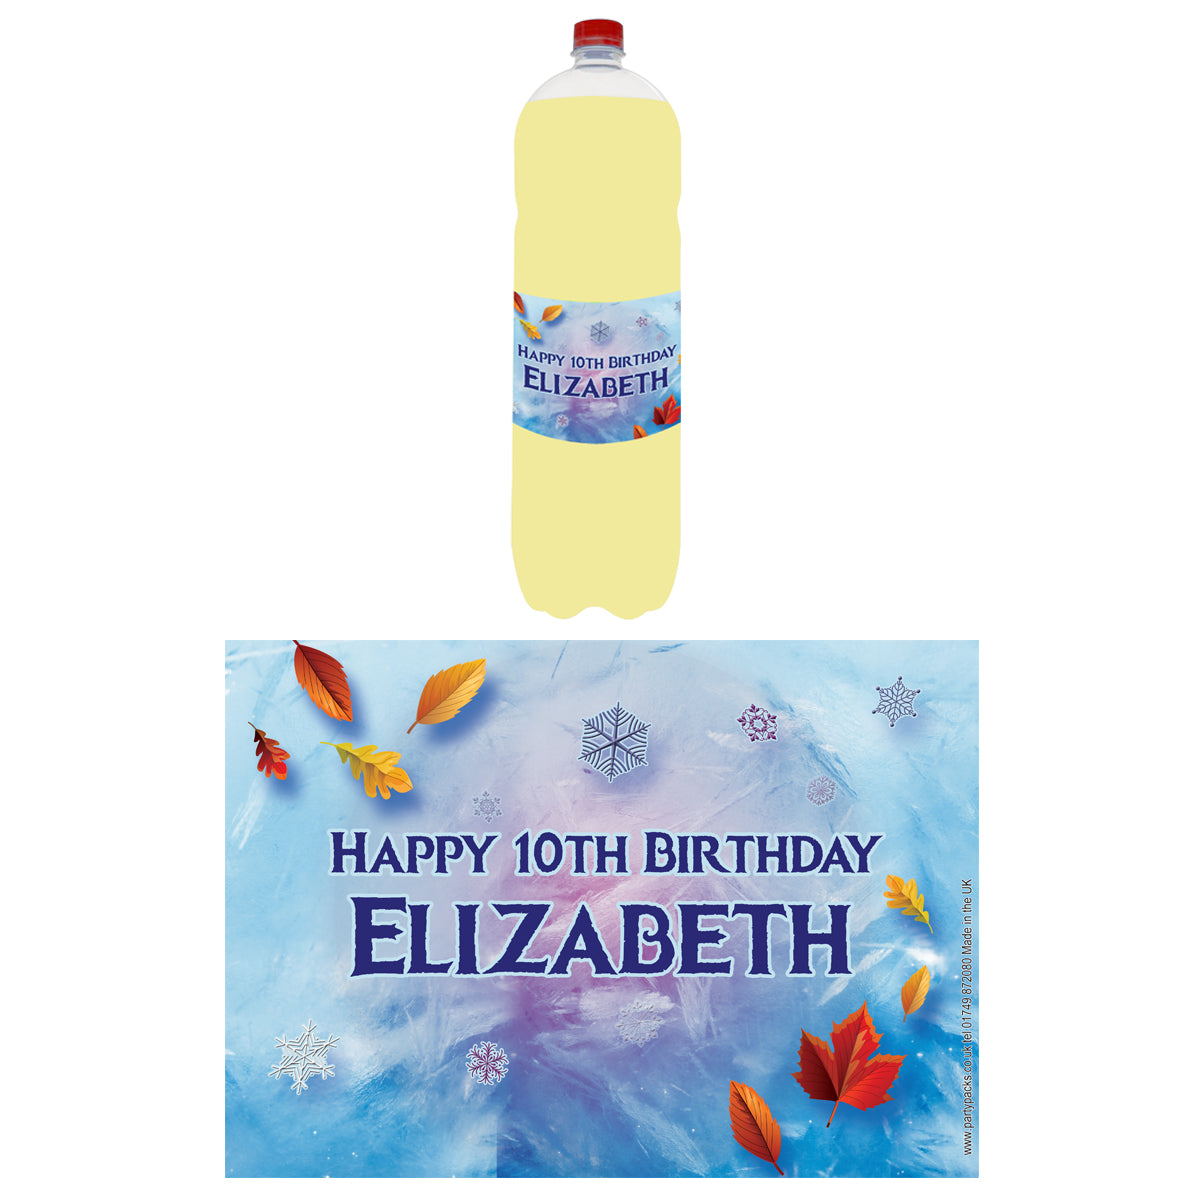 Personalised Bottle Labels - Let It Go - Pack of 4